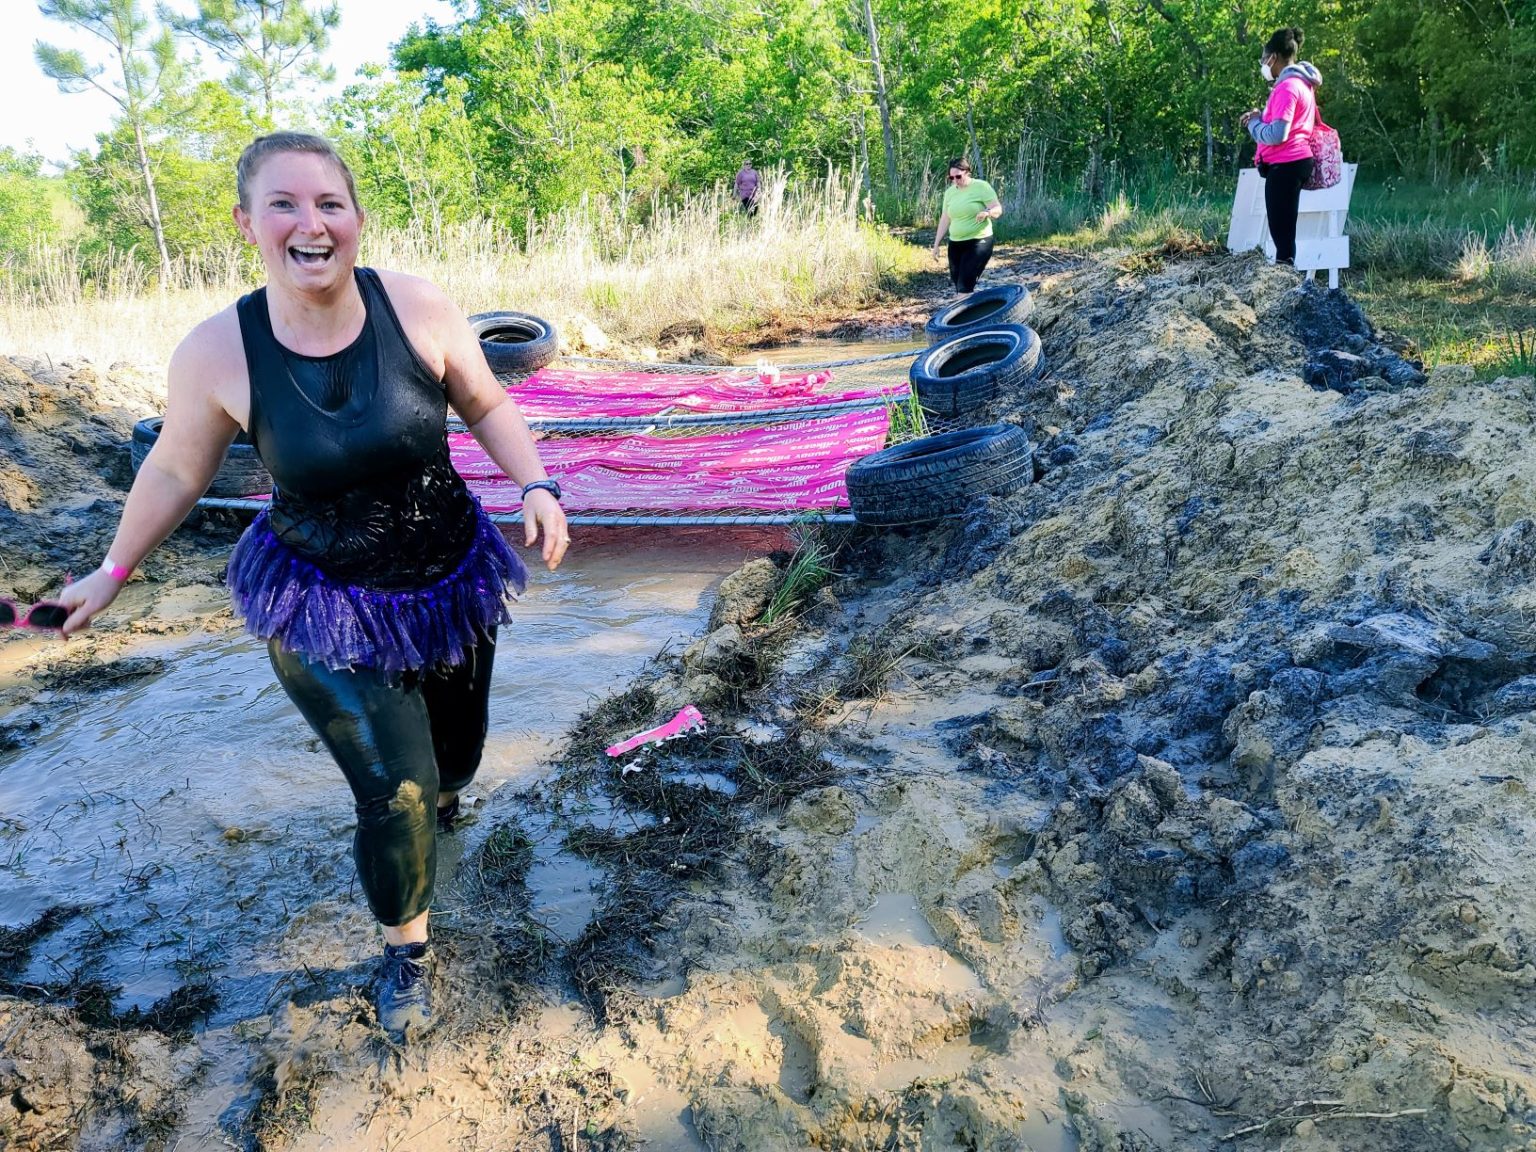 Muddy Princess 5K racers finish messy miles for breast cancer awareness